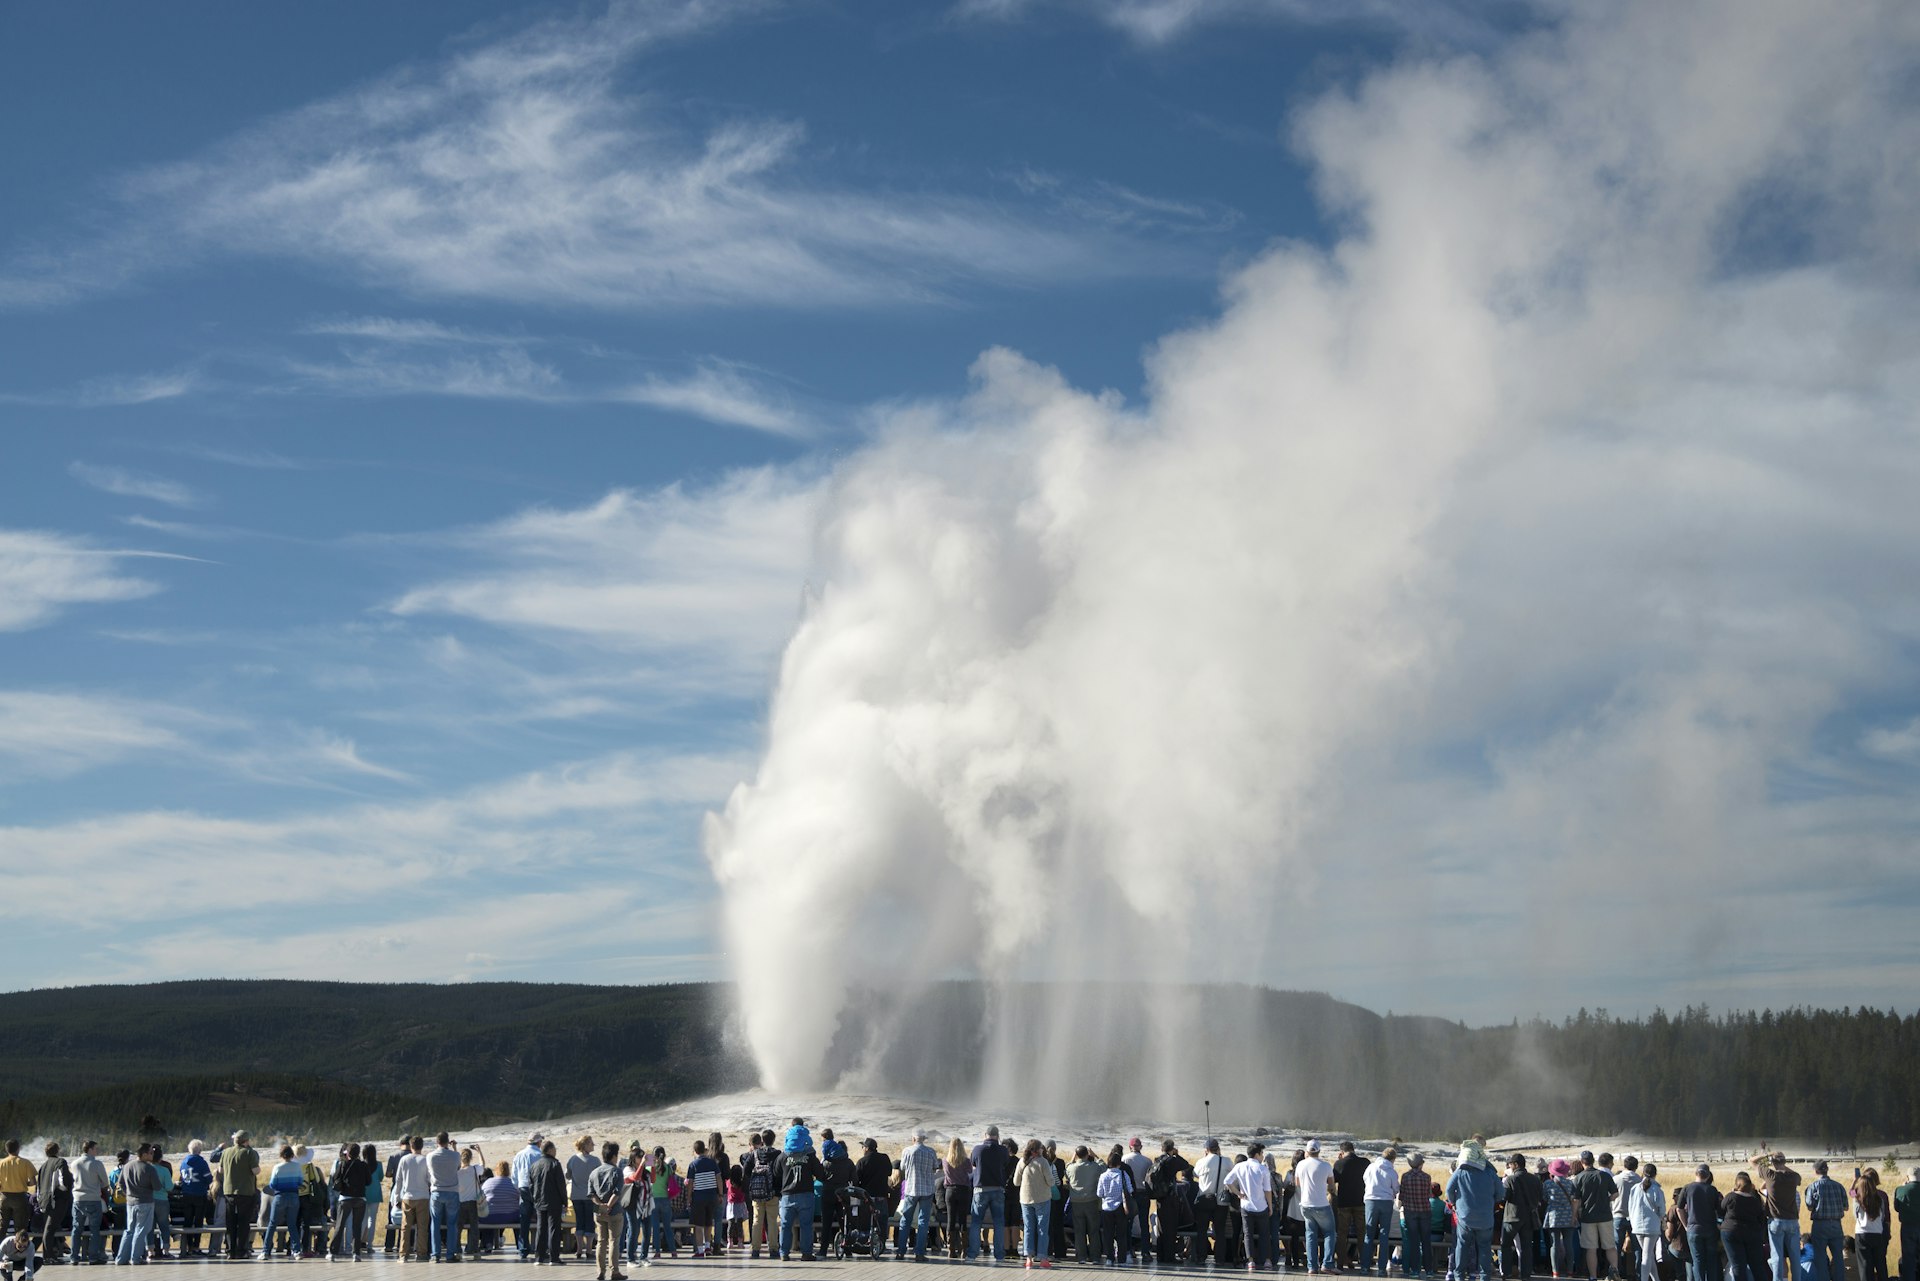 A crowd watching Old Faithful in Yellowstone National Park